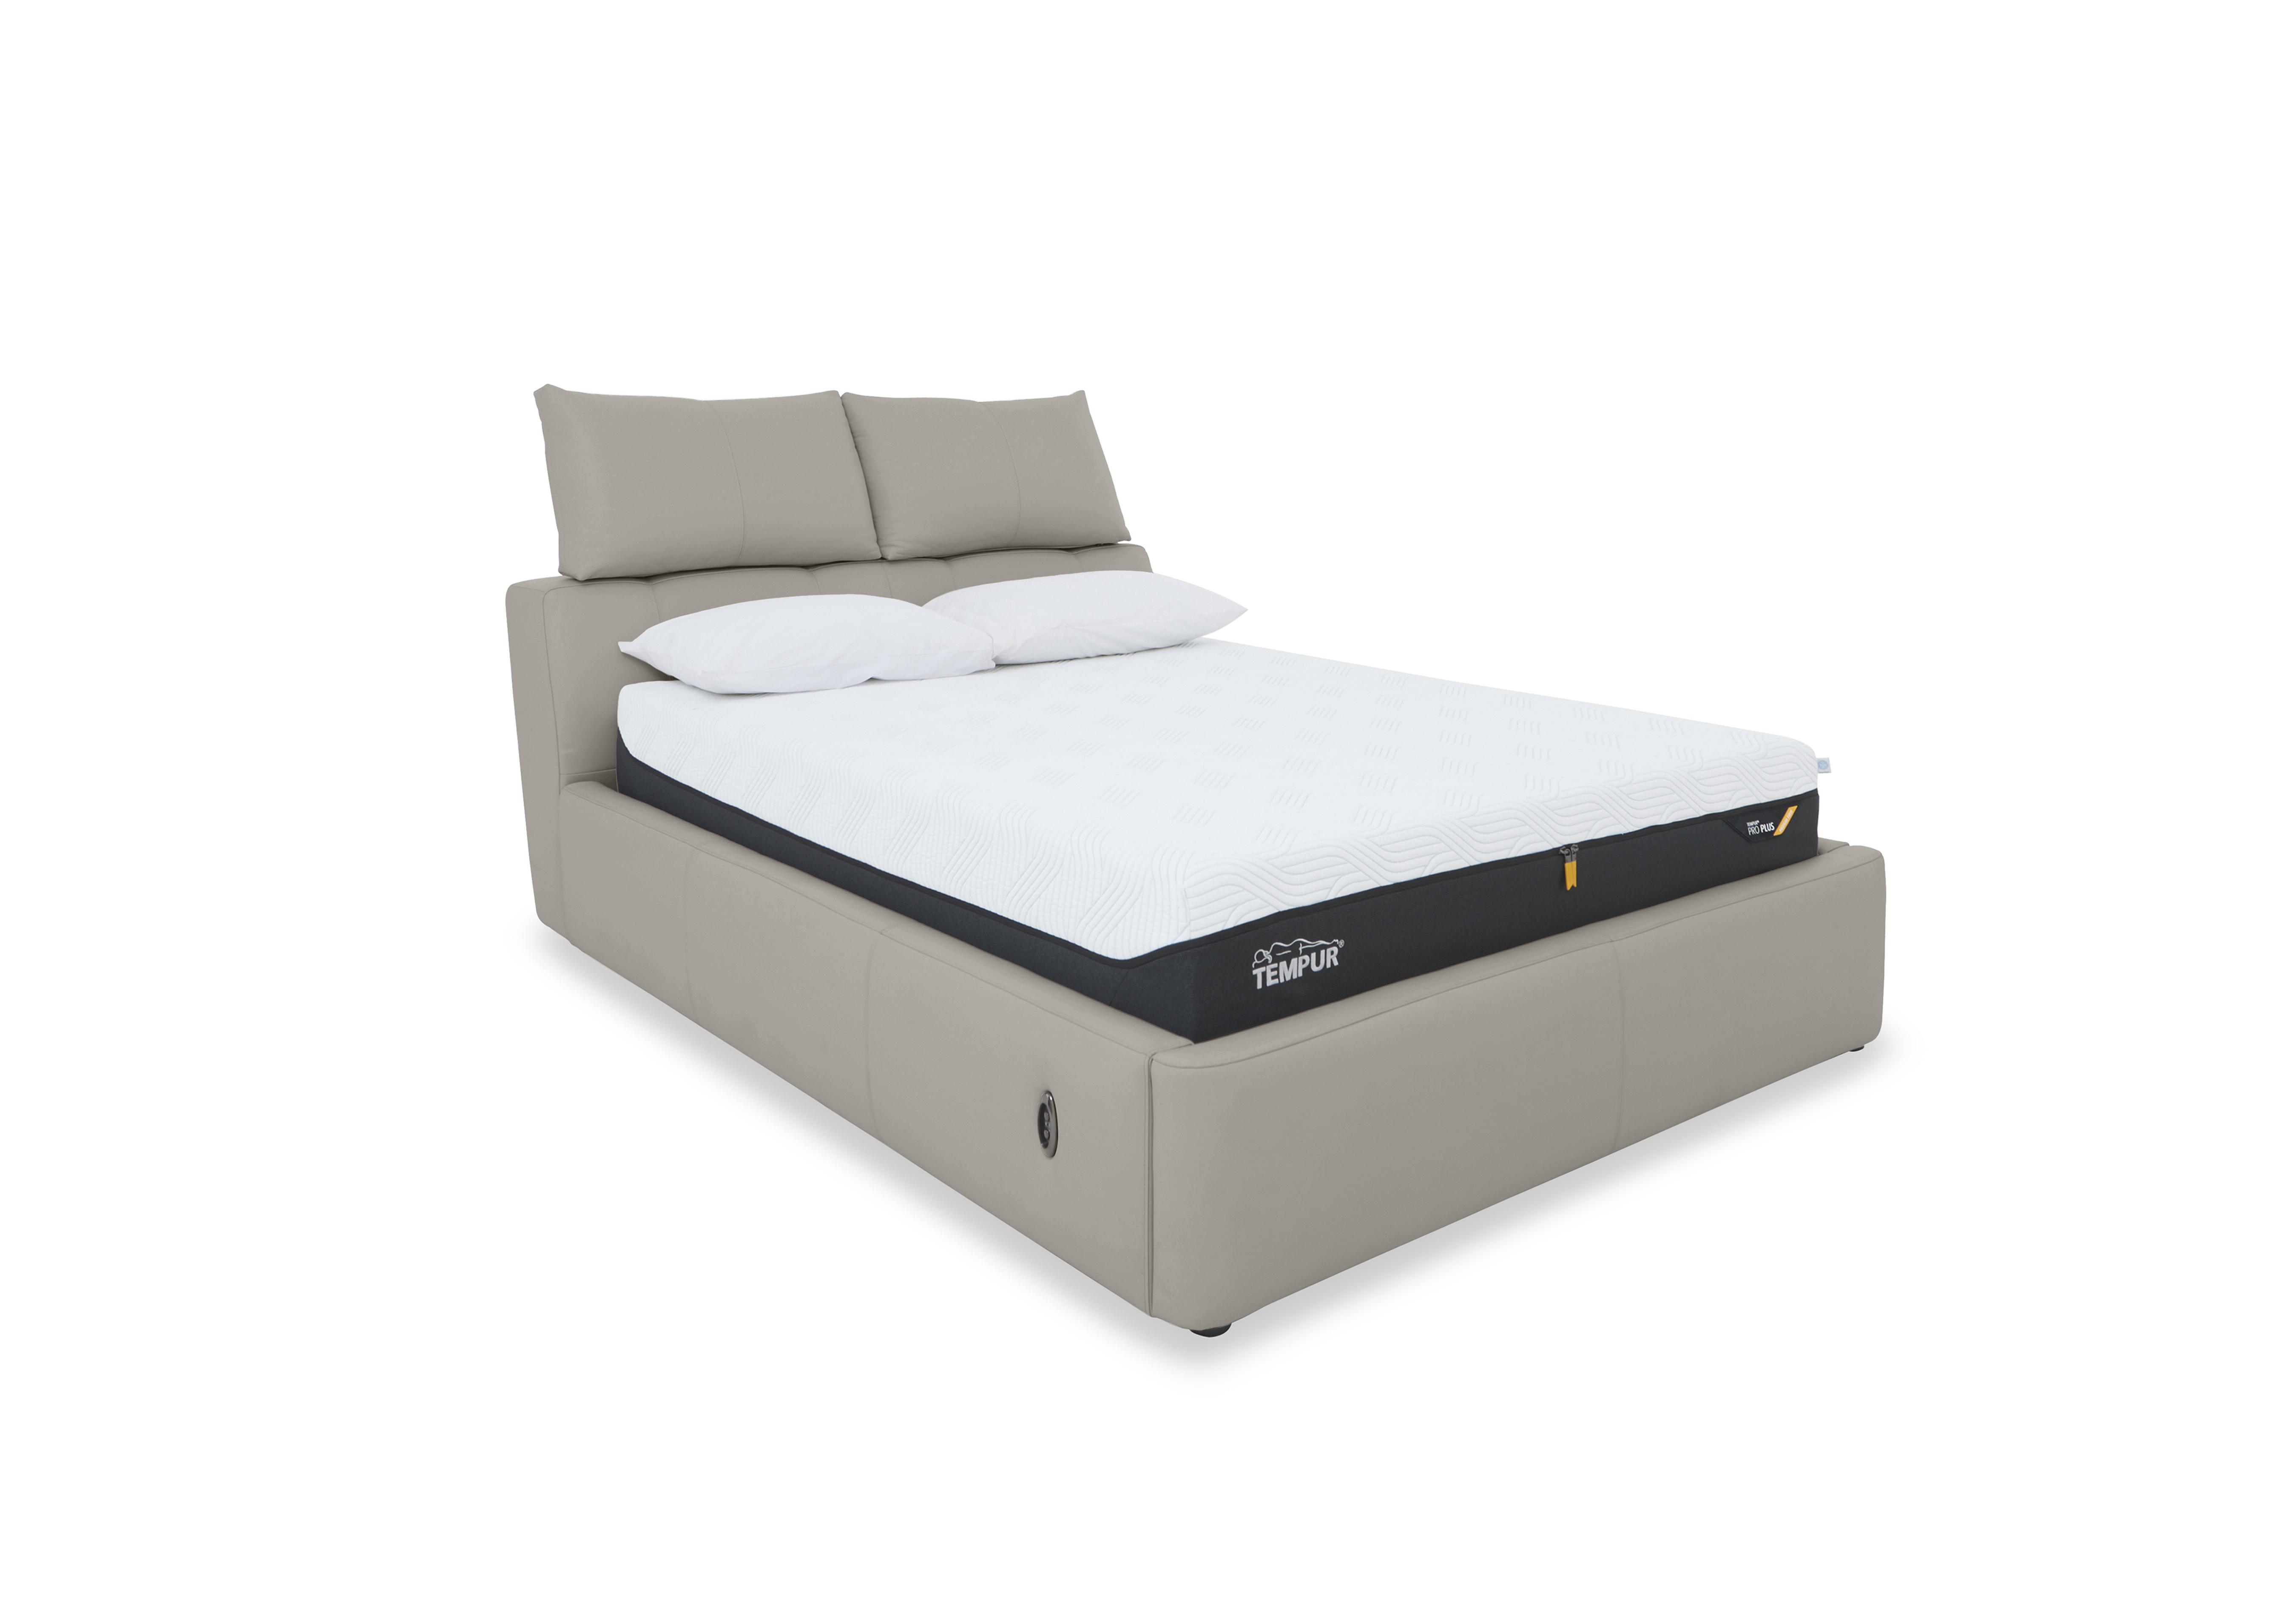 Tyrell Leather Electric Ottoman Bed Frame in Bv-946b Silver Grey on Furniture Village